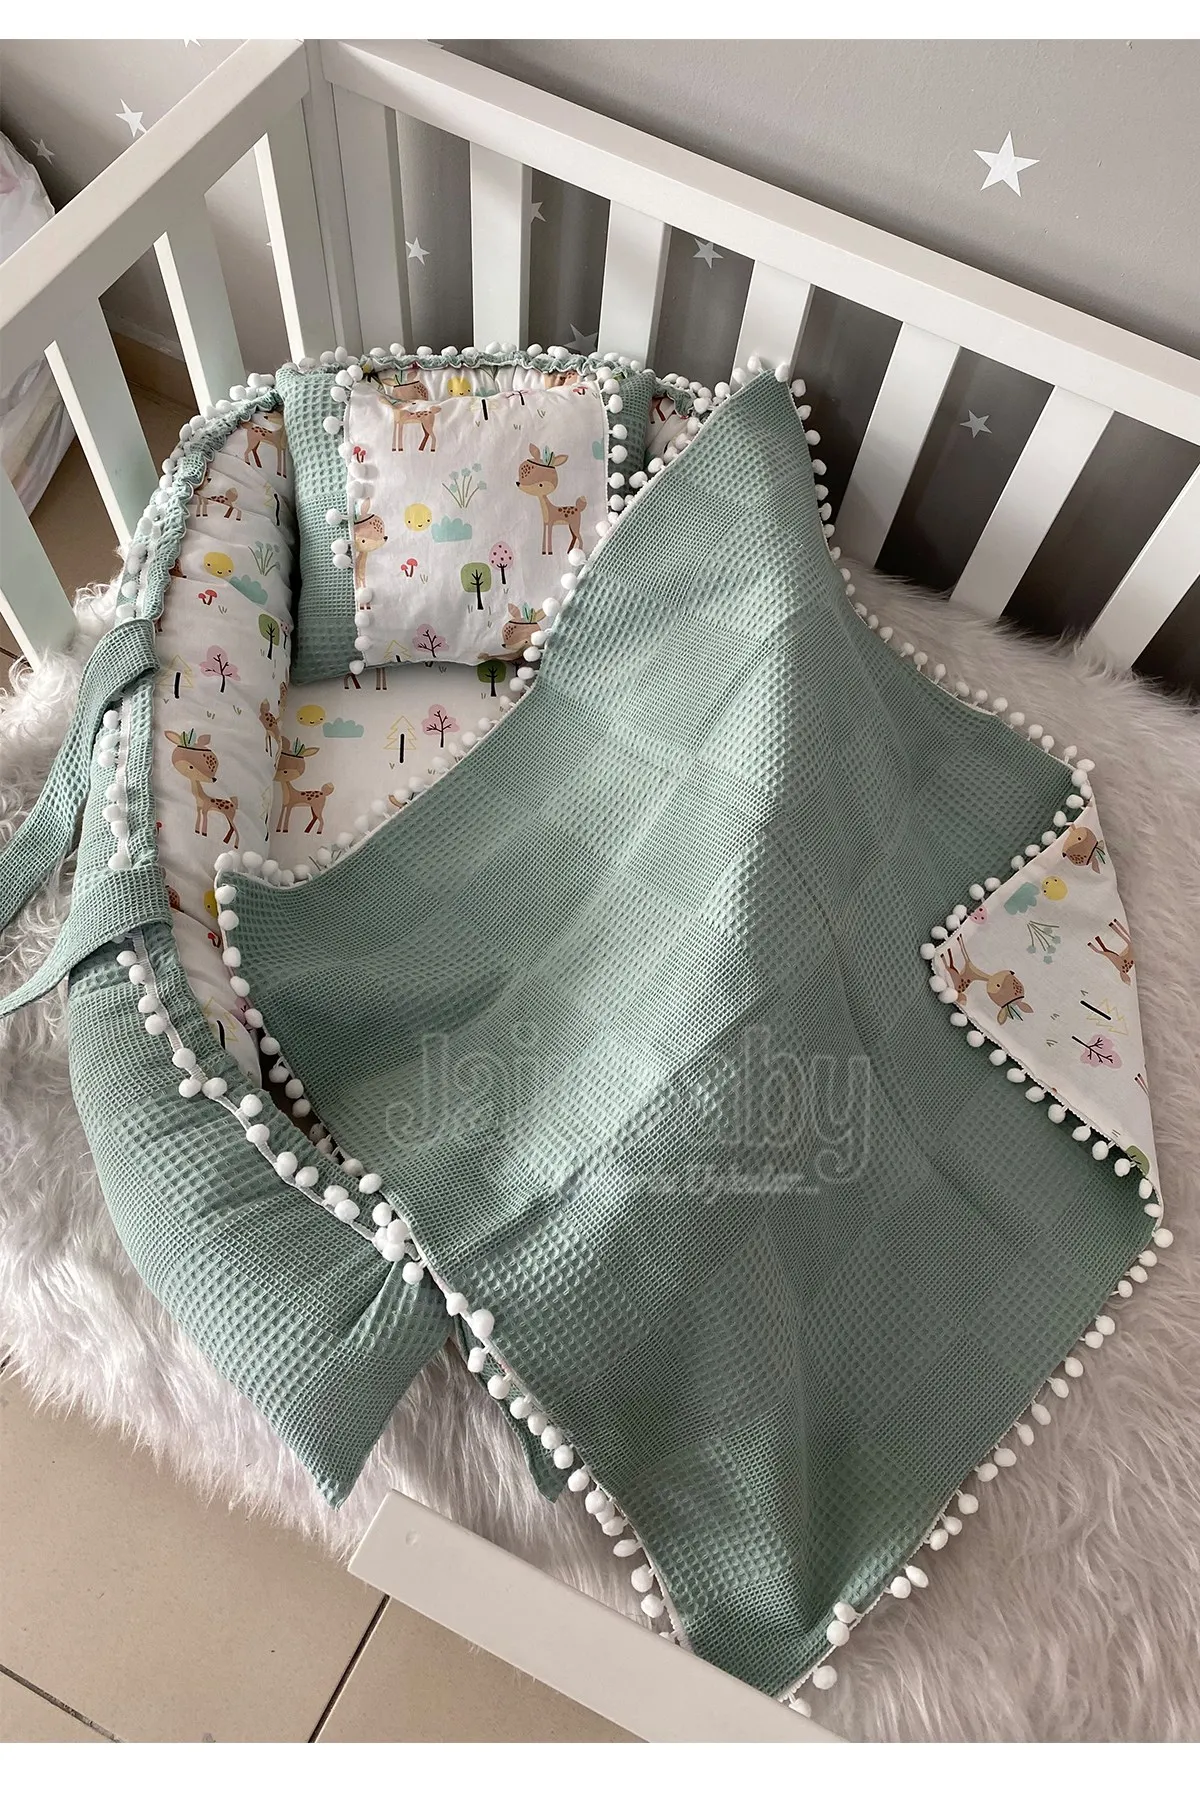 Jaju Baby Handmade Green Pique and Poplin Fabric Gazelle Design 3-Piece Babynest Set with Pompom Mother Side Portable Baby Bed